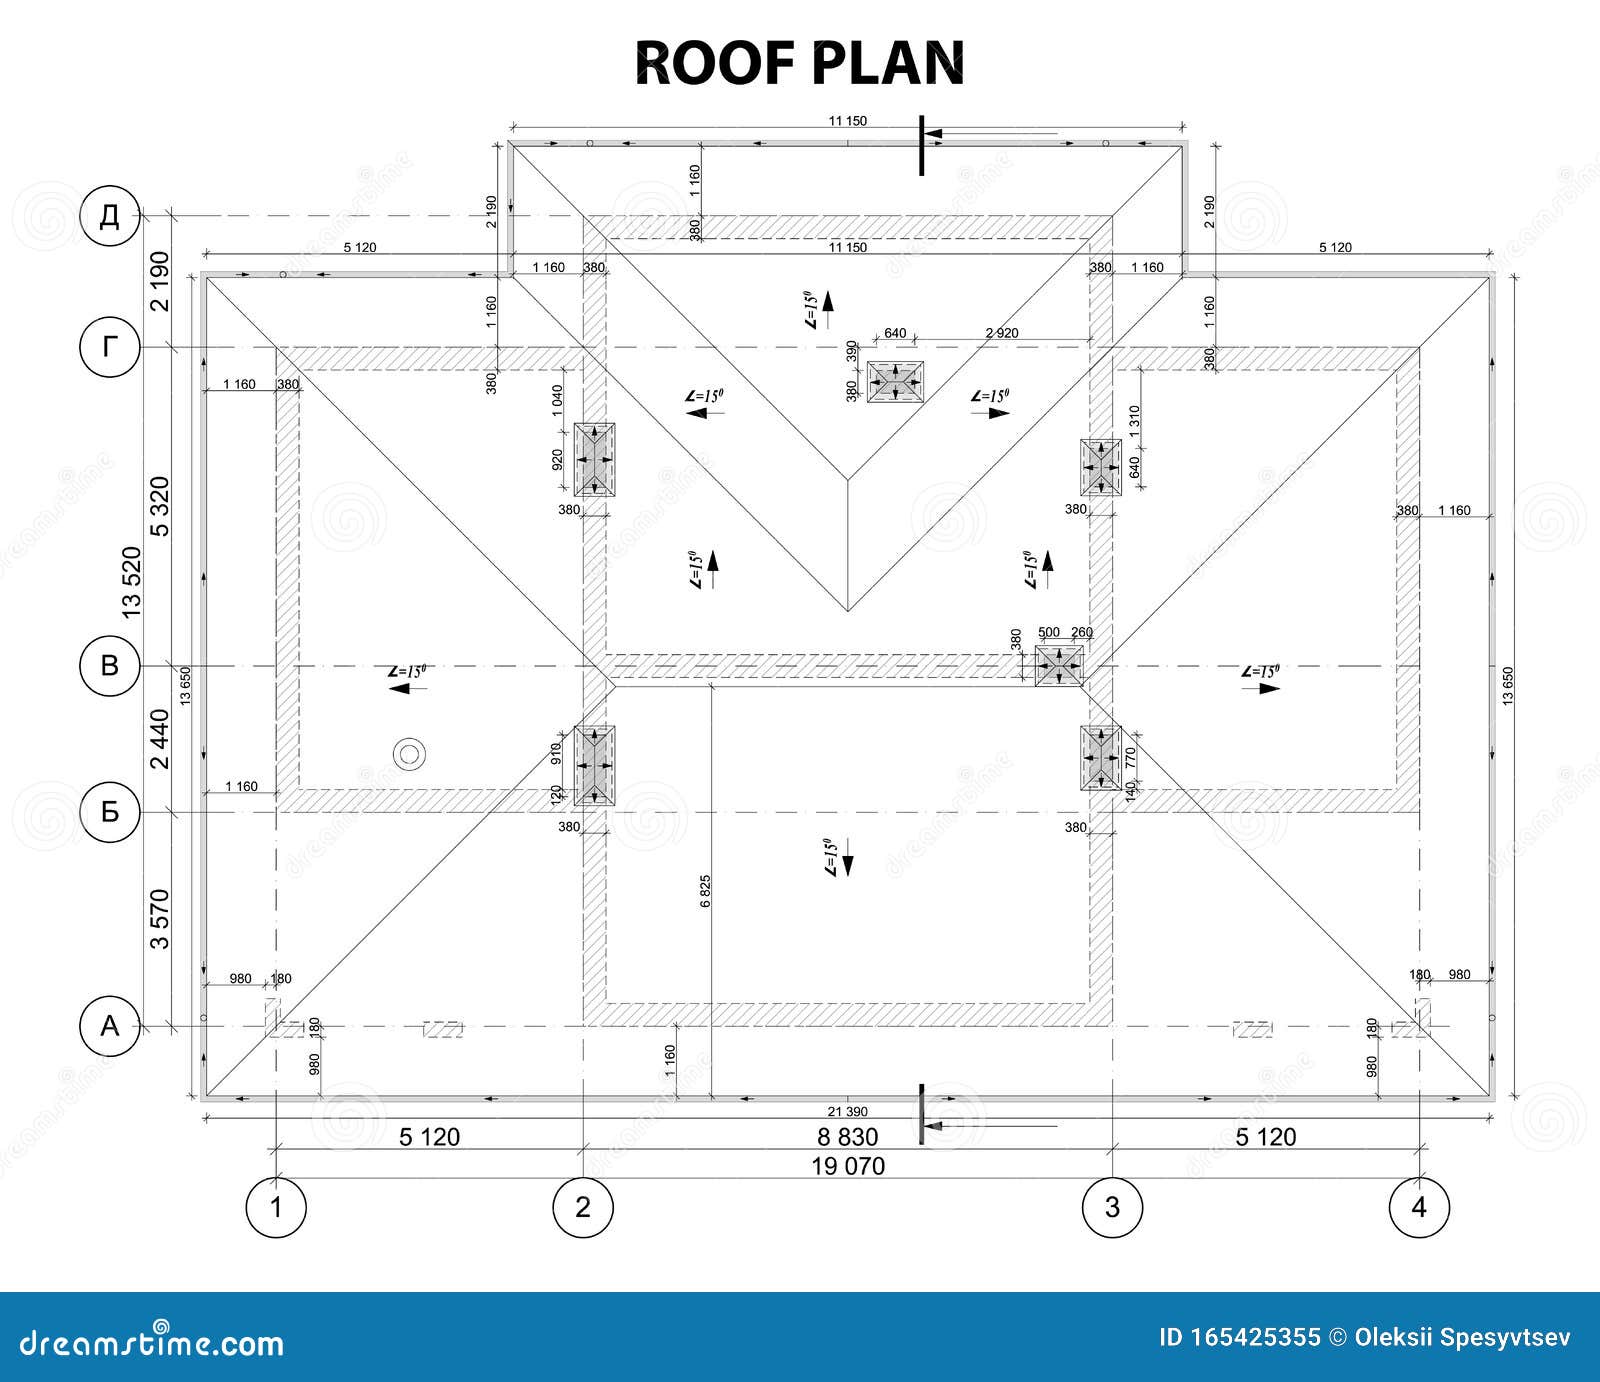 How to measure a house for a metal roof